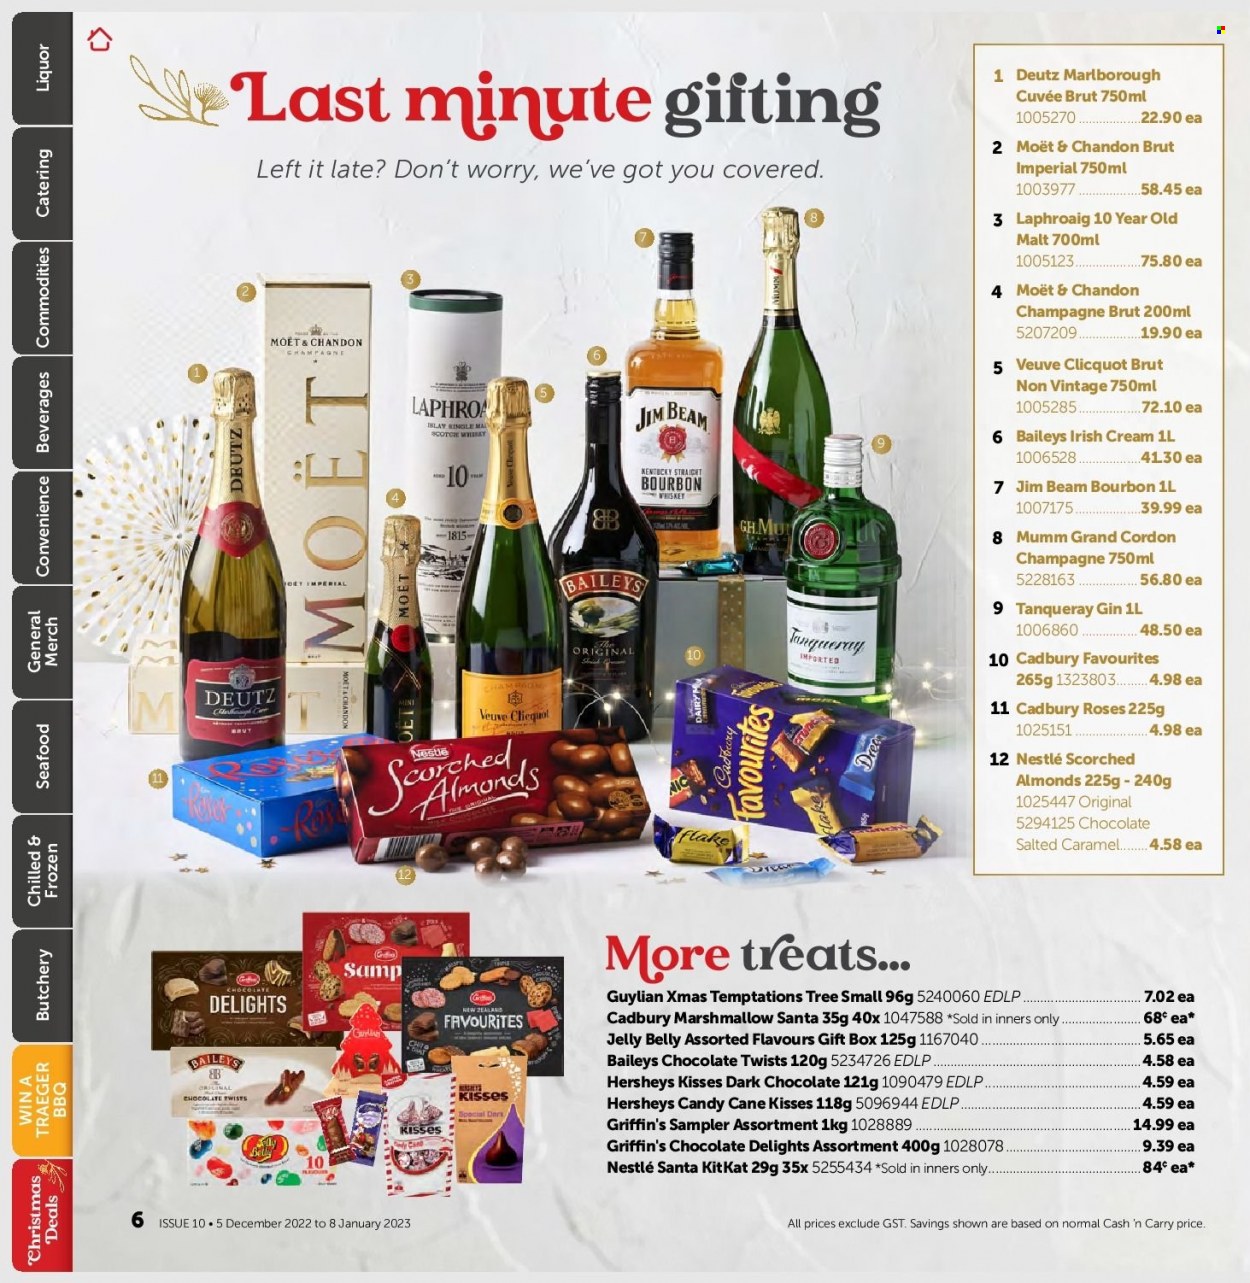 thumbnail - Gilmours mailer - 05.12.2022 - 08.01.2023 - Sales products - seafood, Hershey's, marshmallows, Nestlé, chocolate, candy cane, KitKat, jelly, Santa, dark chocolate, Cadbury, Griffin's, Cadbury Roses, Scorched Almonds, sparkling wine, champagne, Moët & Chandon, Cuvée, Veuve Clicquot, bourbon, gin, whiskey, irish cream, Baileys, Jim Beam, bourbon whiskey, scotch whisky, whisky. Page 5.